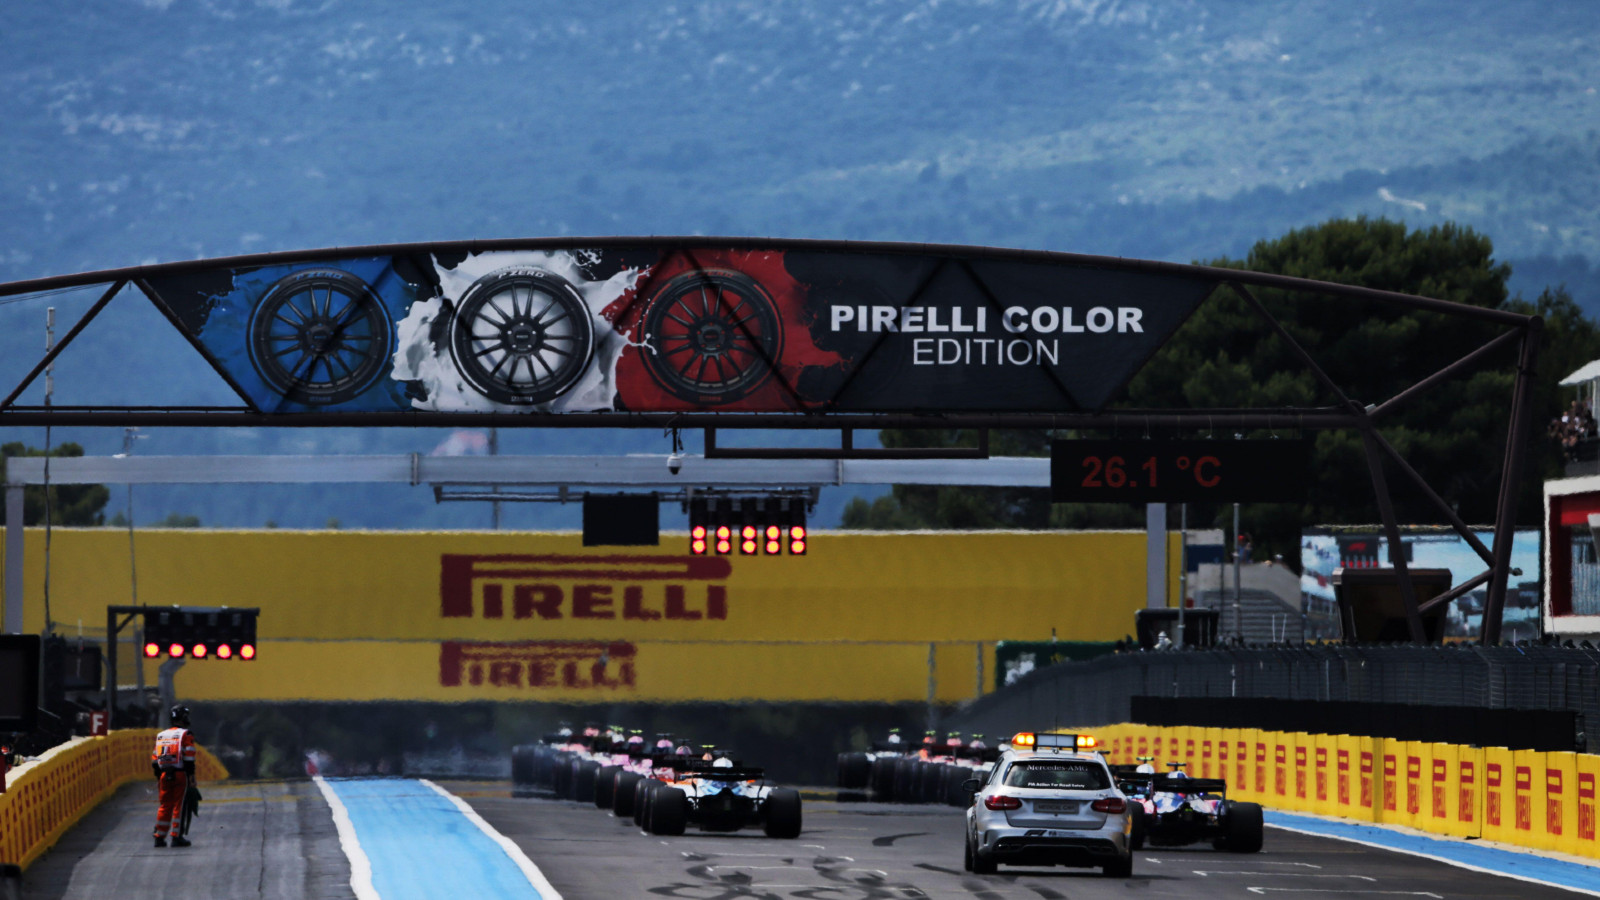 French Grand Prix at Paul Ricard, grid start. Paul Ricard, July 2020. French GP weather